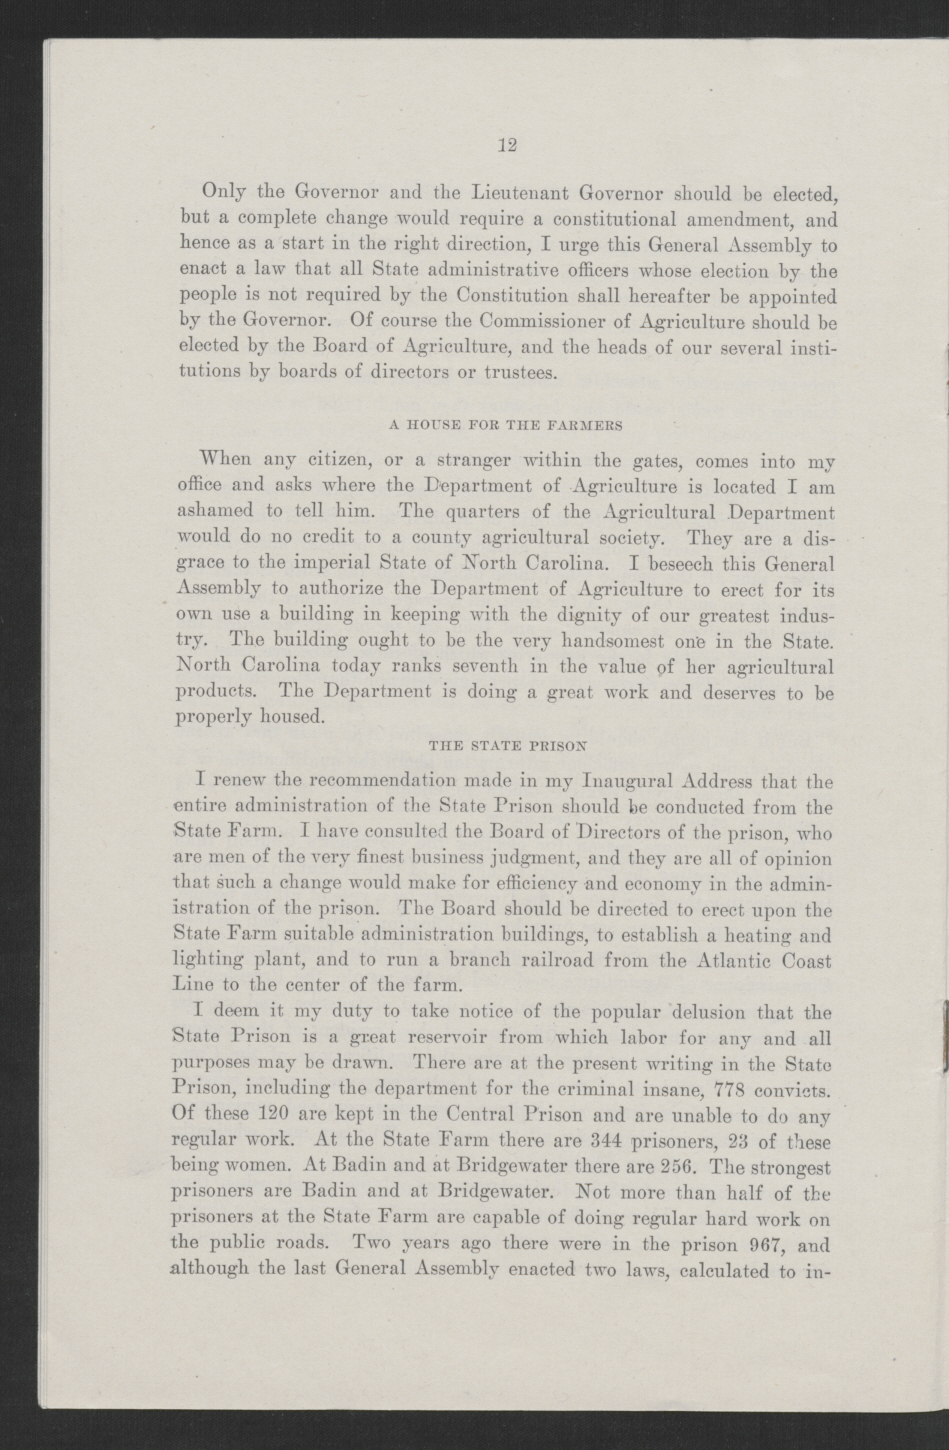 Biennial Message of Governor Thomas W. Bickett to the General Assembly, January 9, 1919, page 10